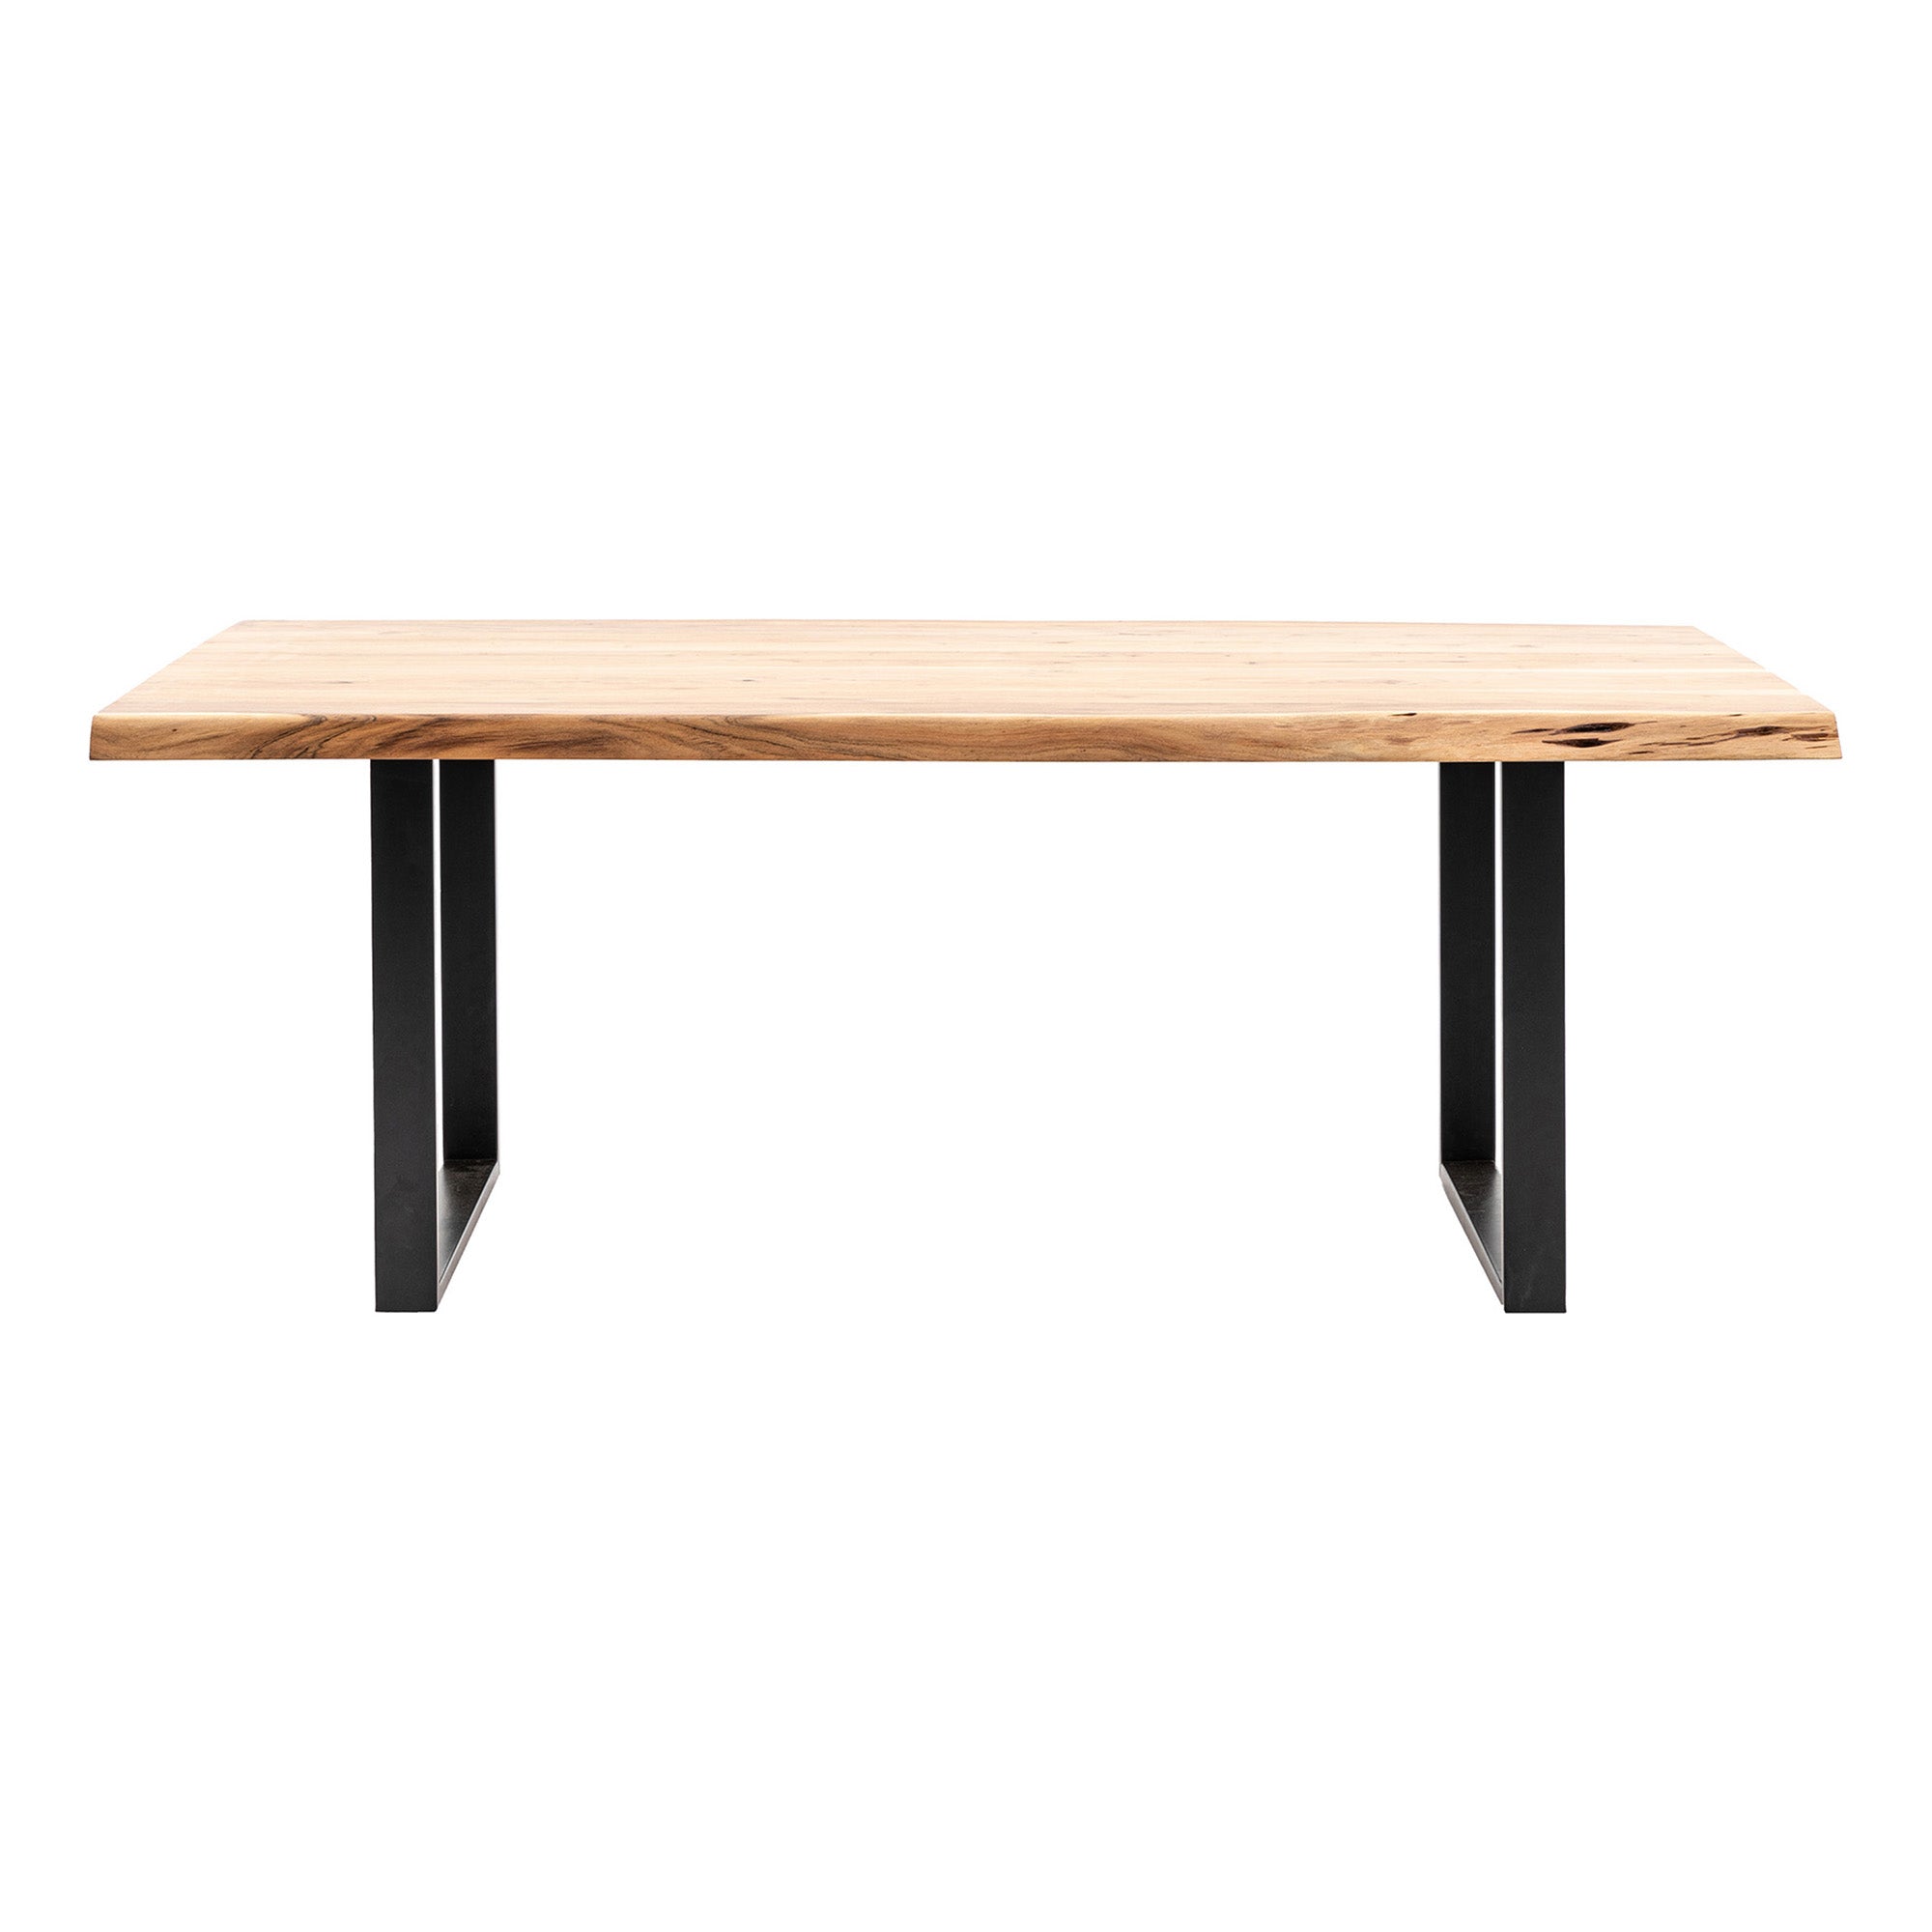 The Semi-Industrial Dining Table